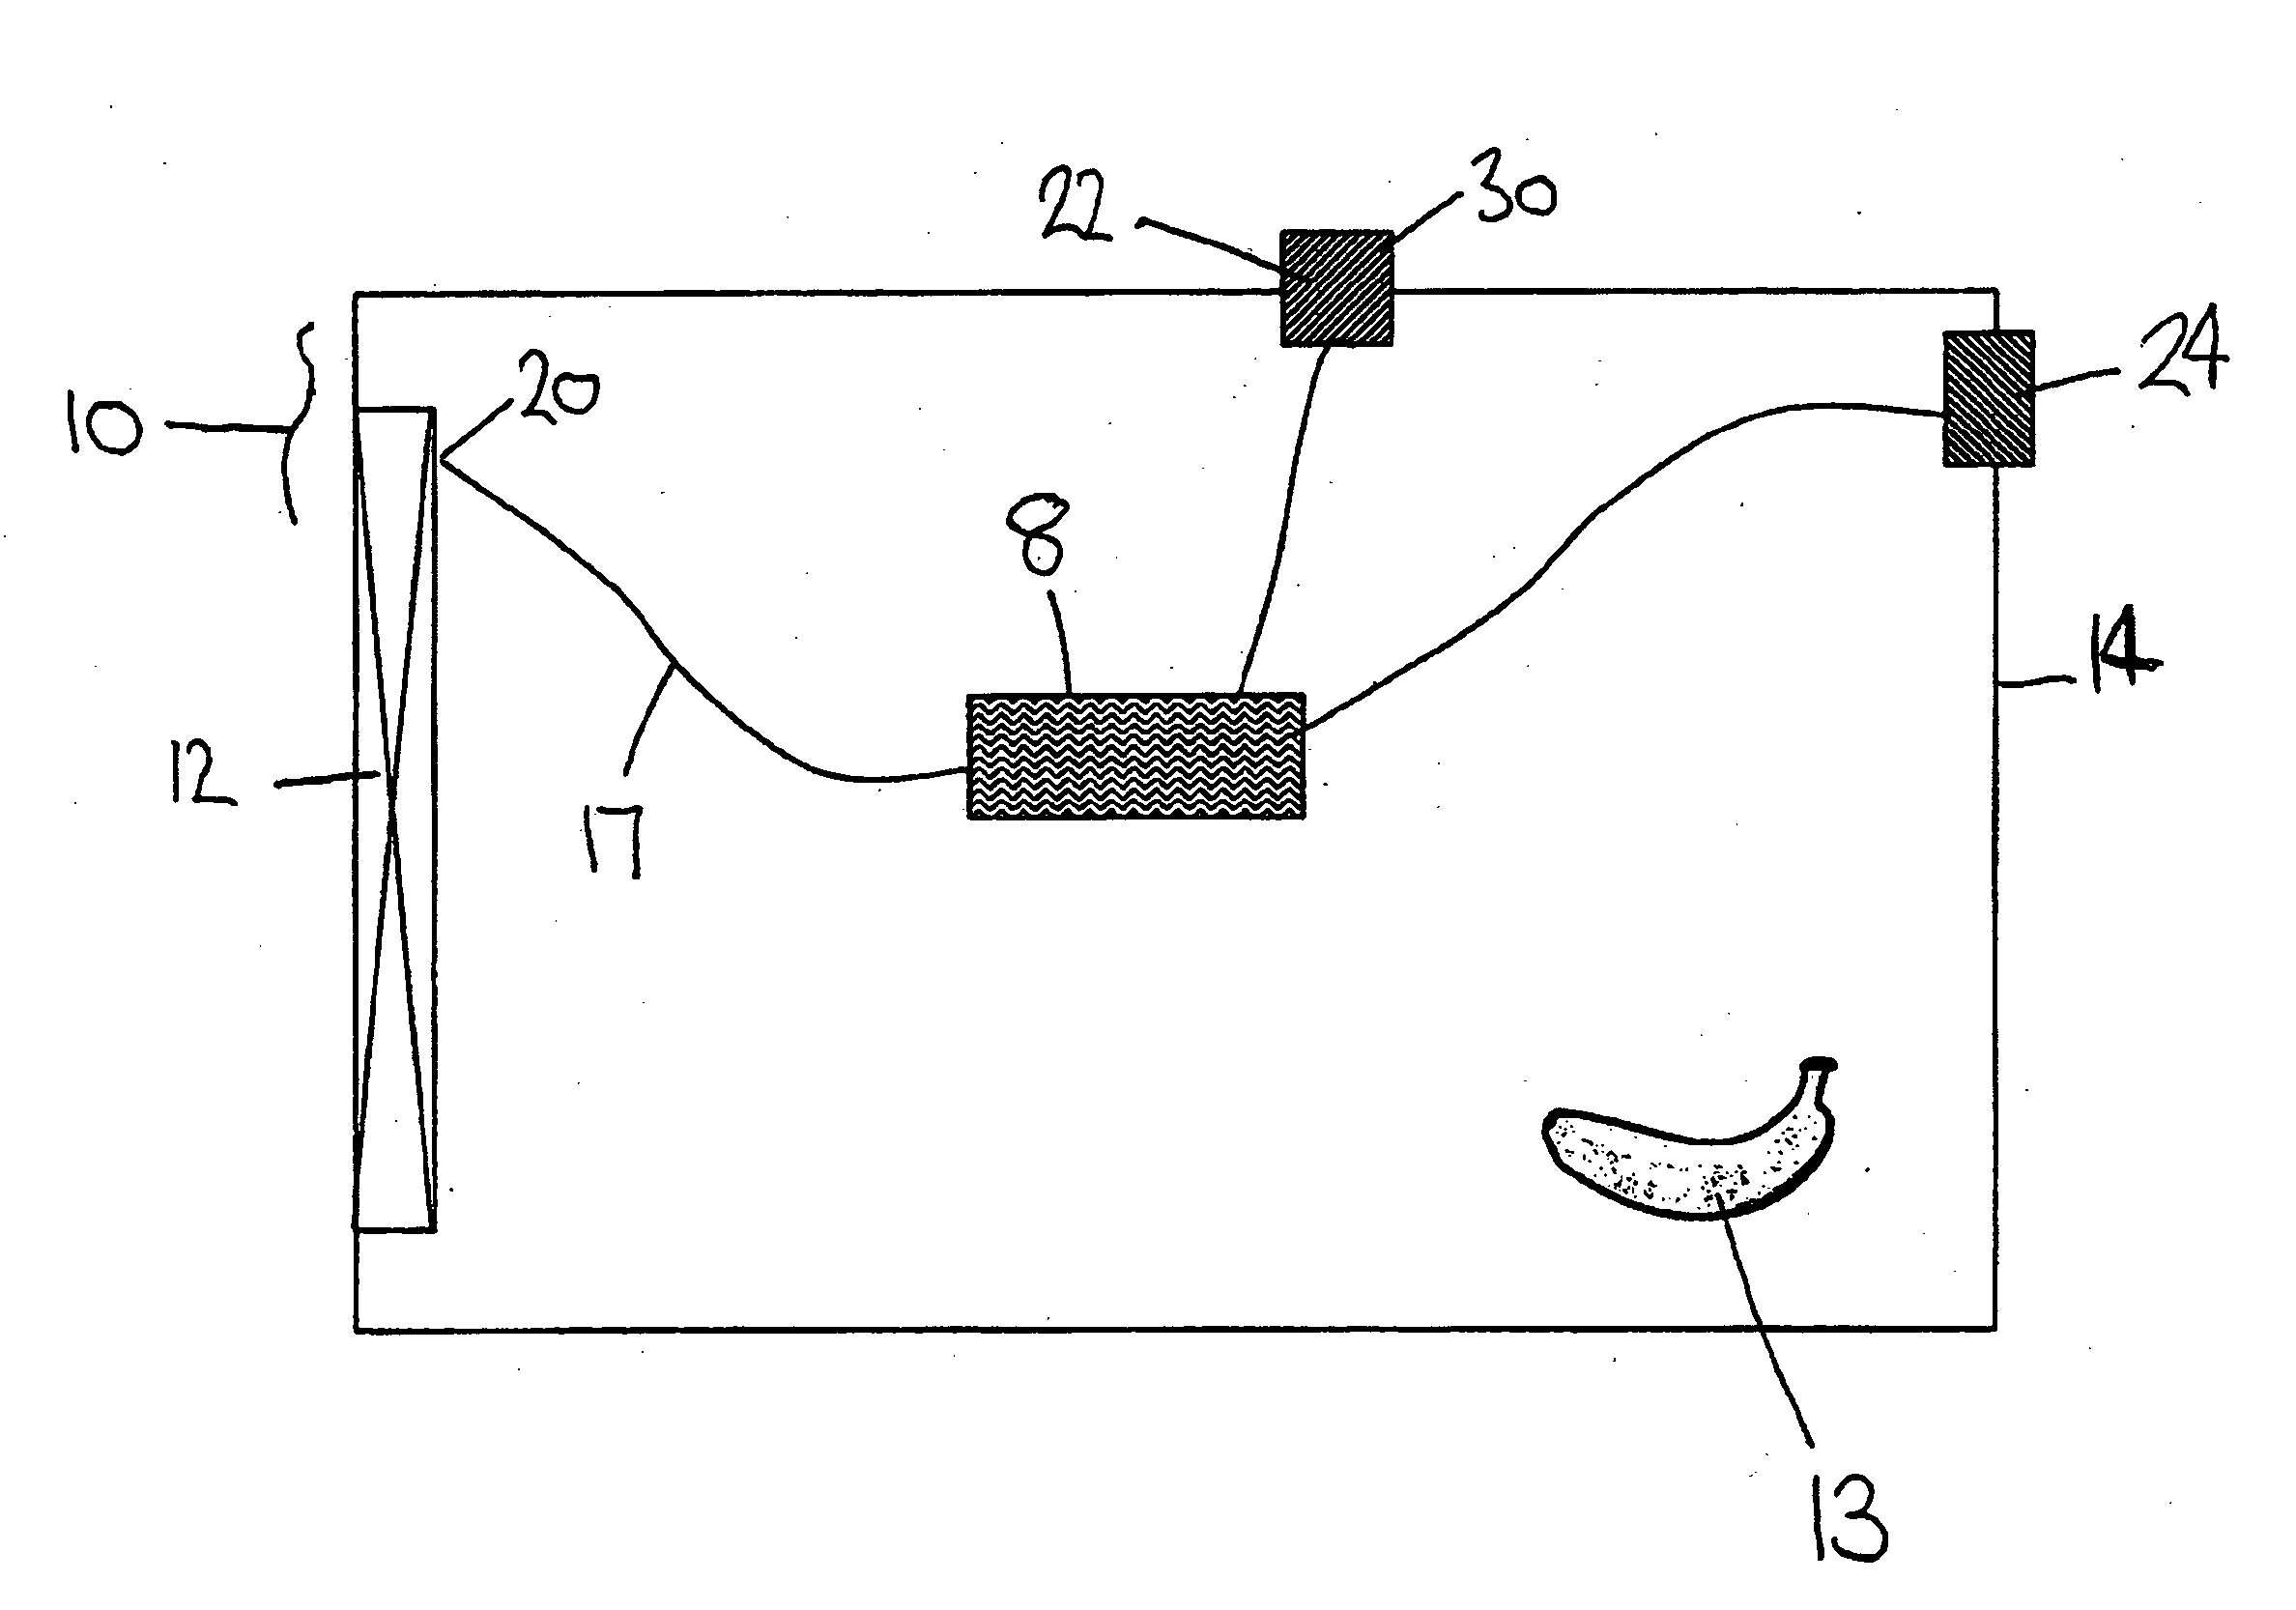 Apparatus and methods for controlling atmospheric gas composition within a container